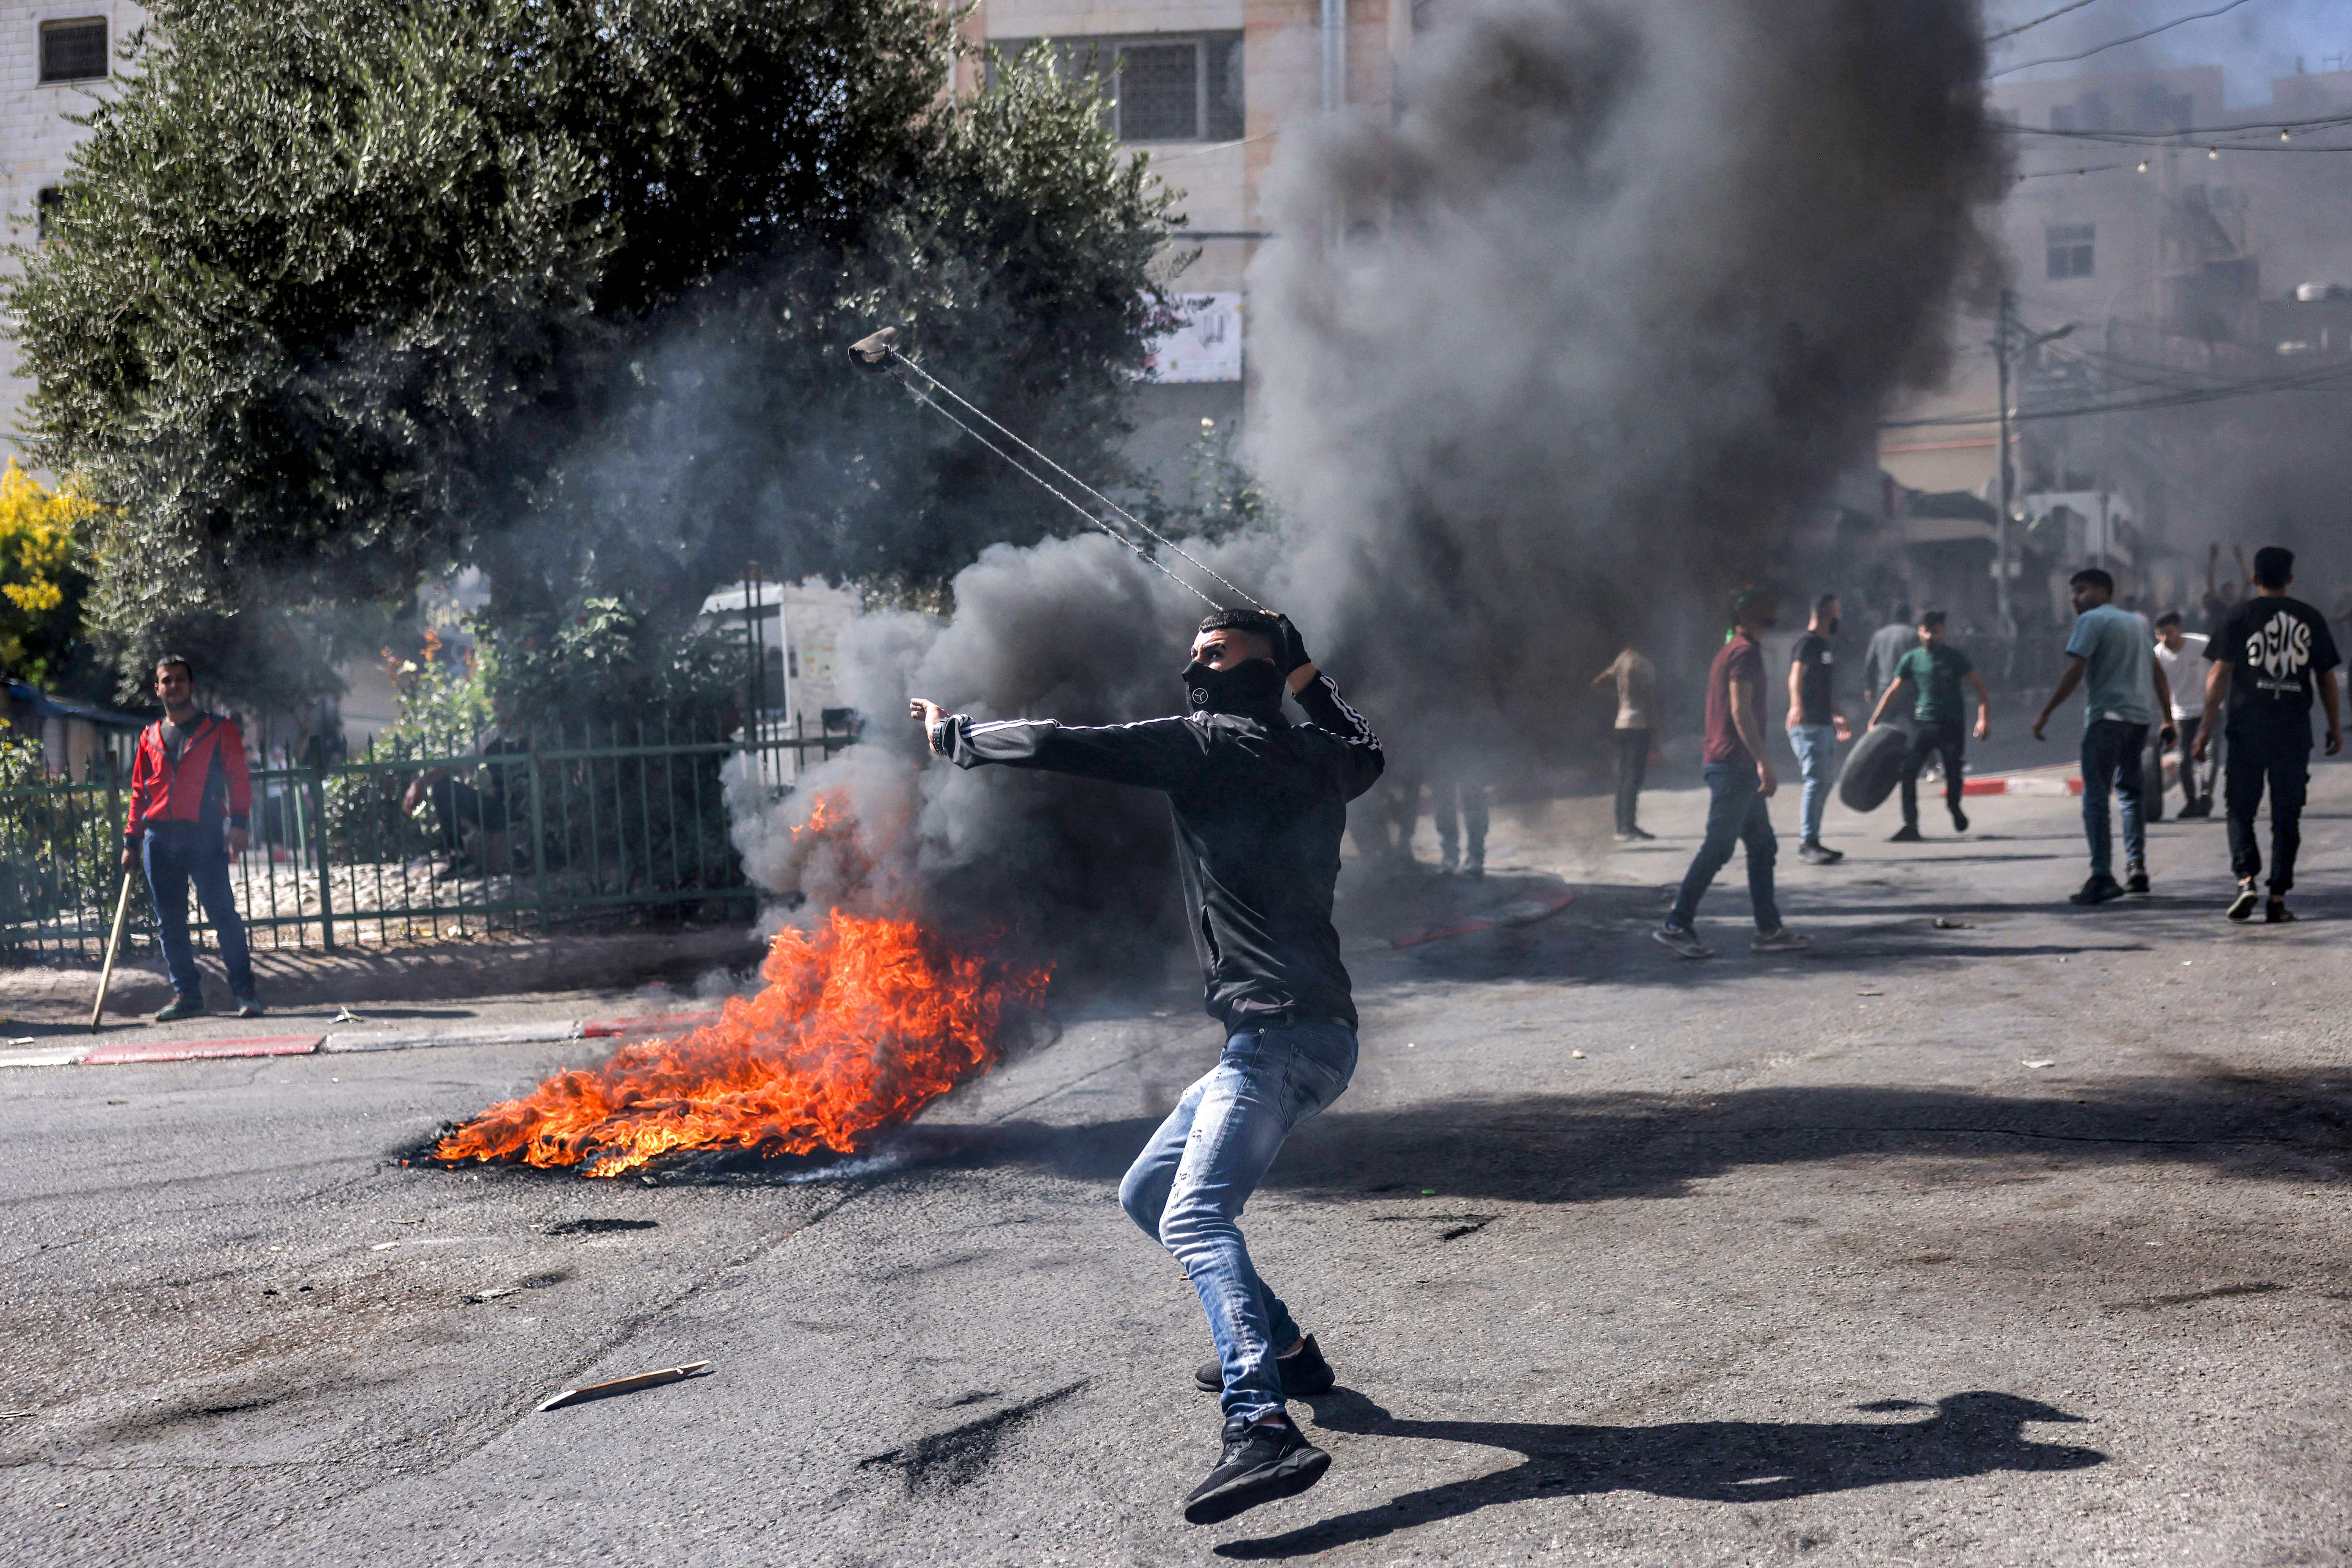 A Palestinian protester hurls back a tear gas canister with a sling during clashes with Israeli forces in the city of Hebron in the occupied West Bank on October 13.